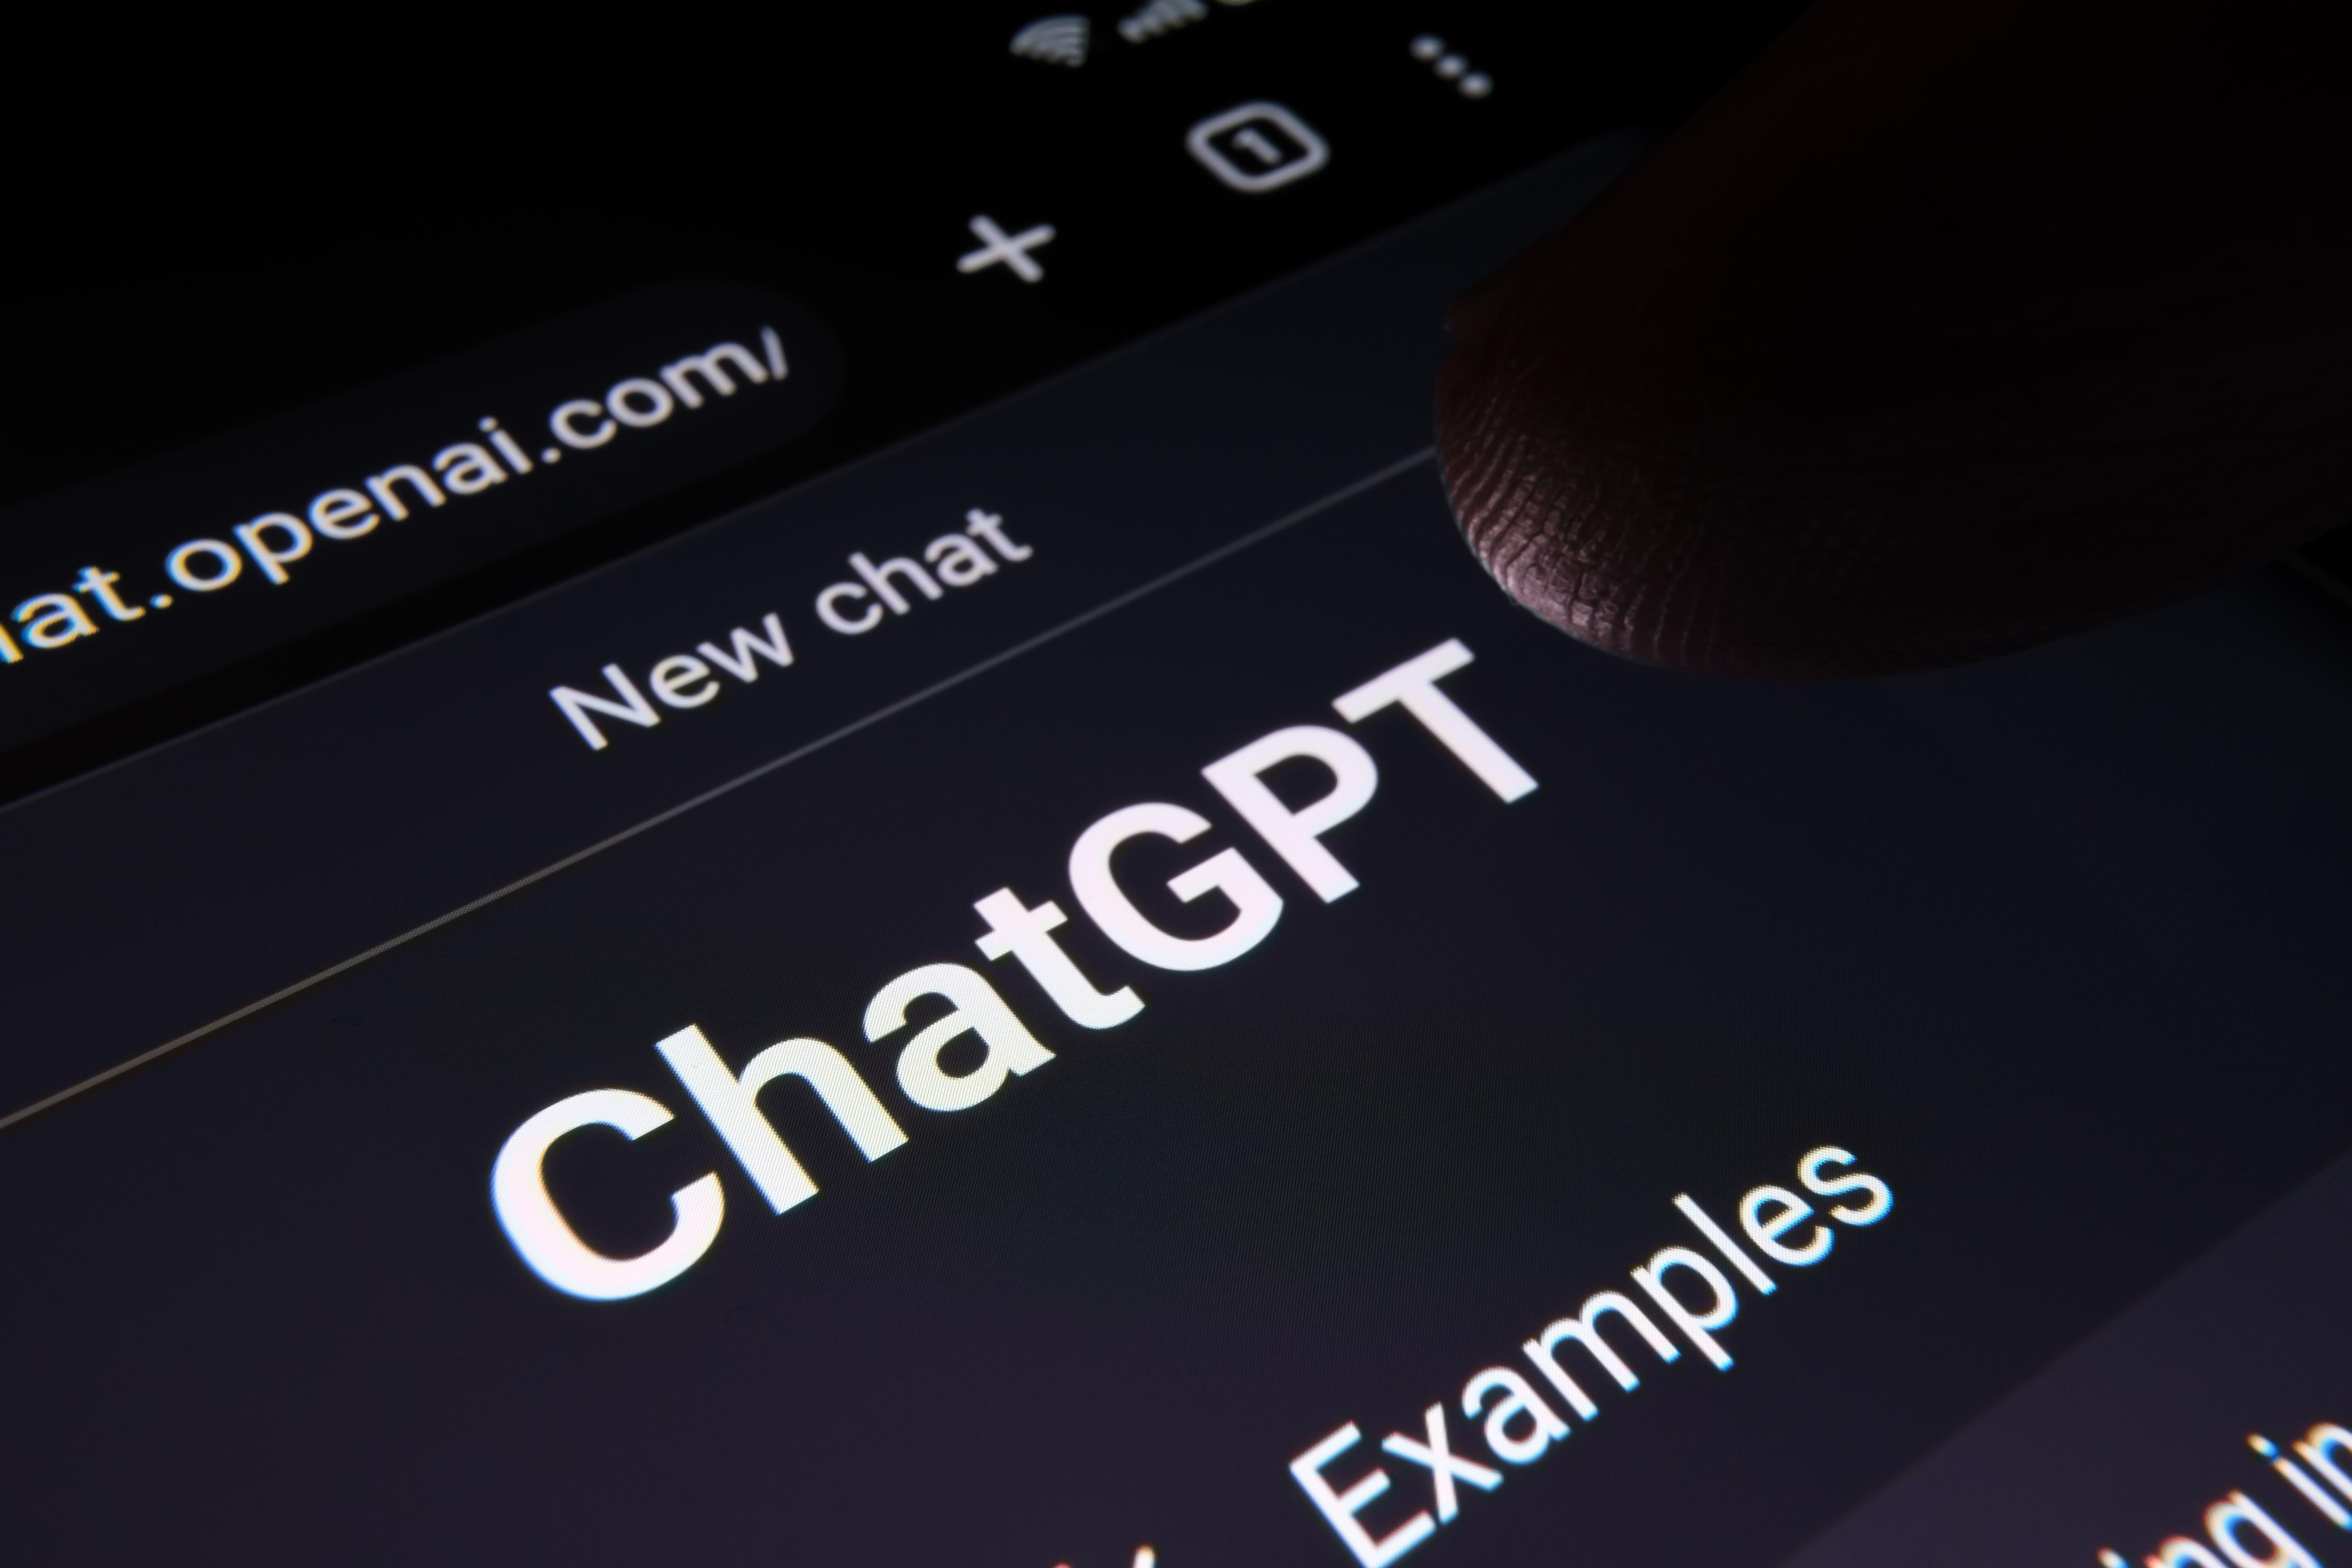 Finger touching ChatGPT chat bot screen seen on smartphone display with large Chat GPT logo. AI chatbot by OpenAI. Macro photo. Stafford, United Kingdom, February 19, 2023